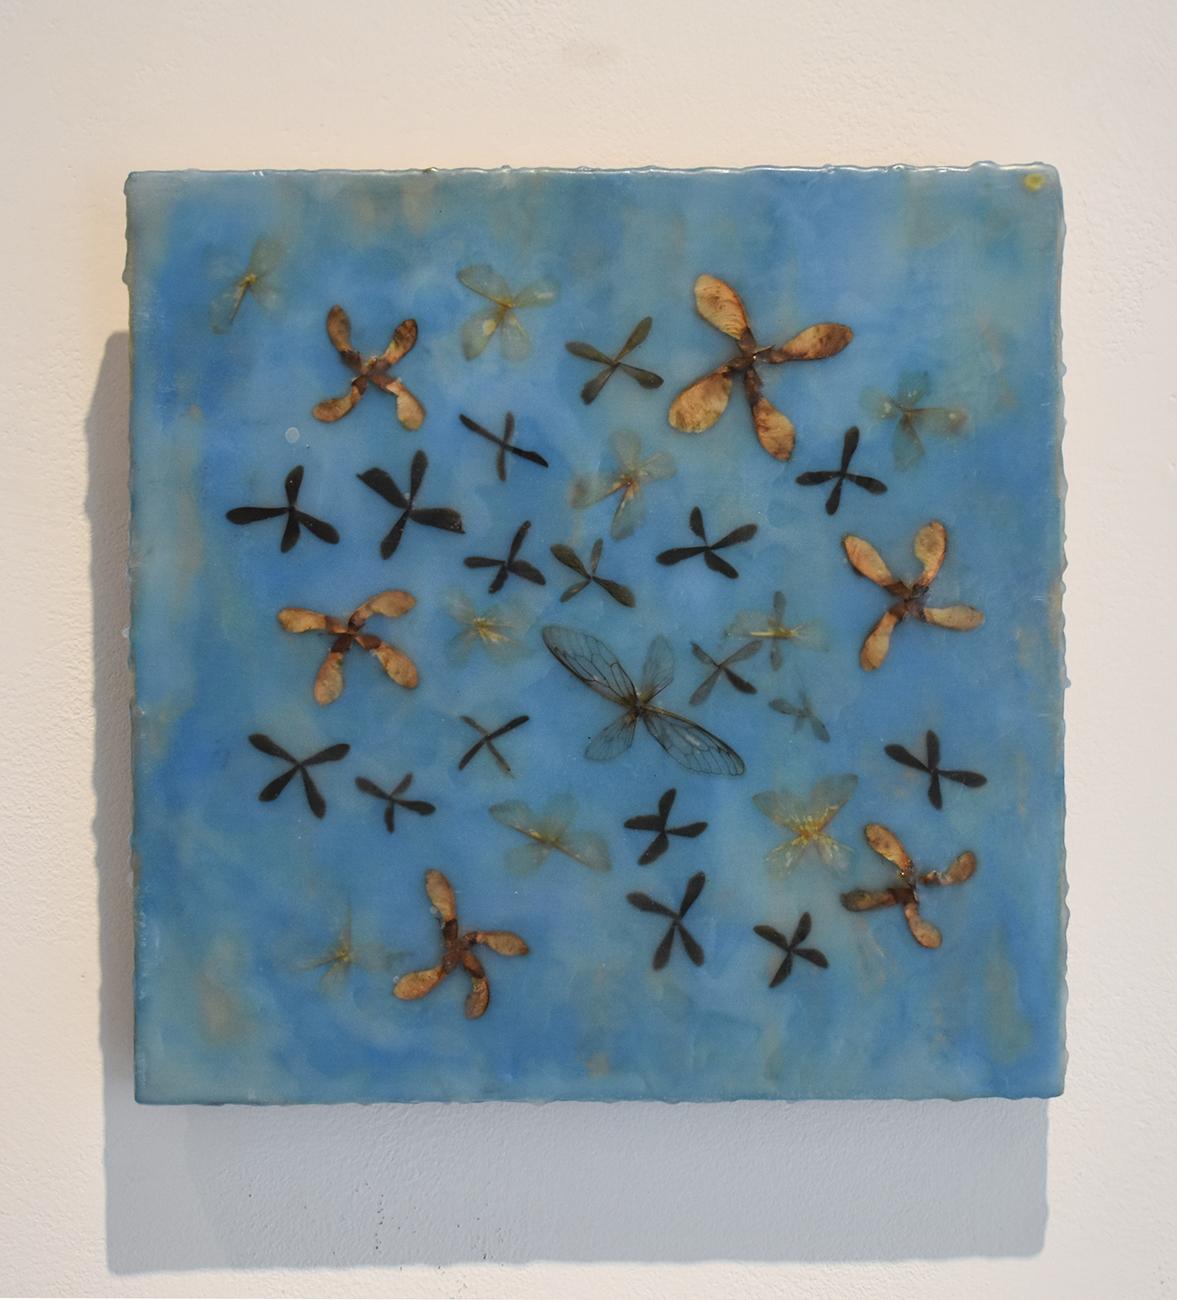 Abstract mixed media encaustic painting, blue encaustic with natural material including maple leaves and insect wings on wood panel 
12 x 12 x 1.5 inches, ready to hang as is
Sturdy d-ring is on the back for installation
Artist's signature is